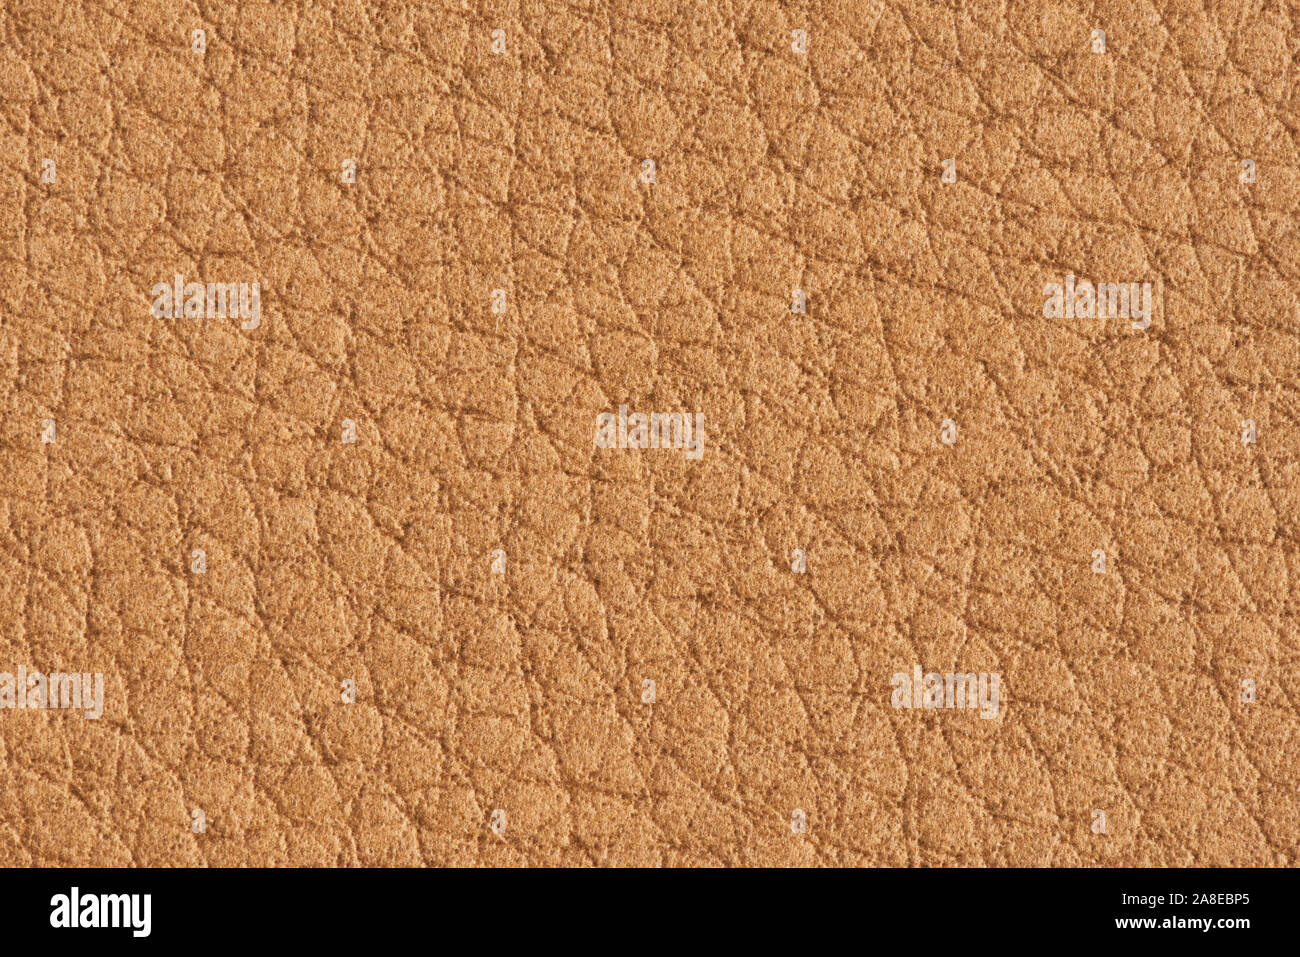 Cognac paper with leather texture for background. Paper for interior and exterior decoration or background for handcrafts. Stock Photo